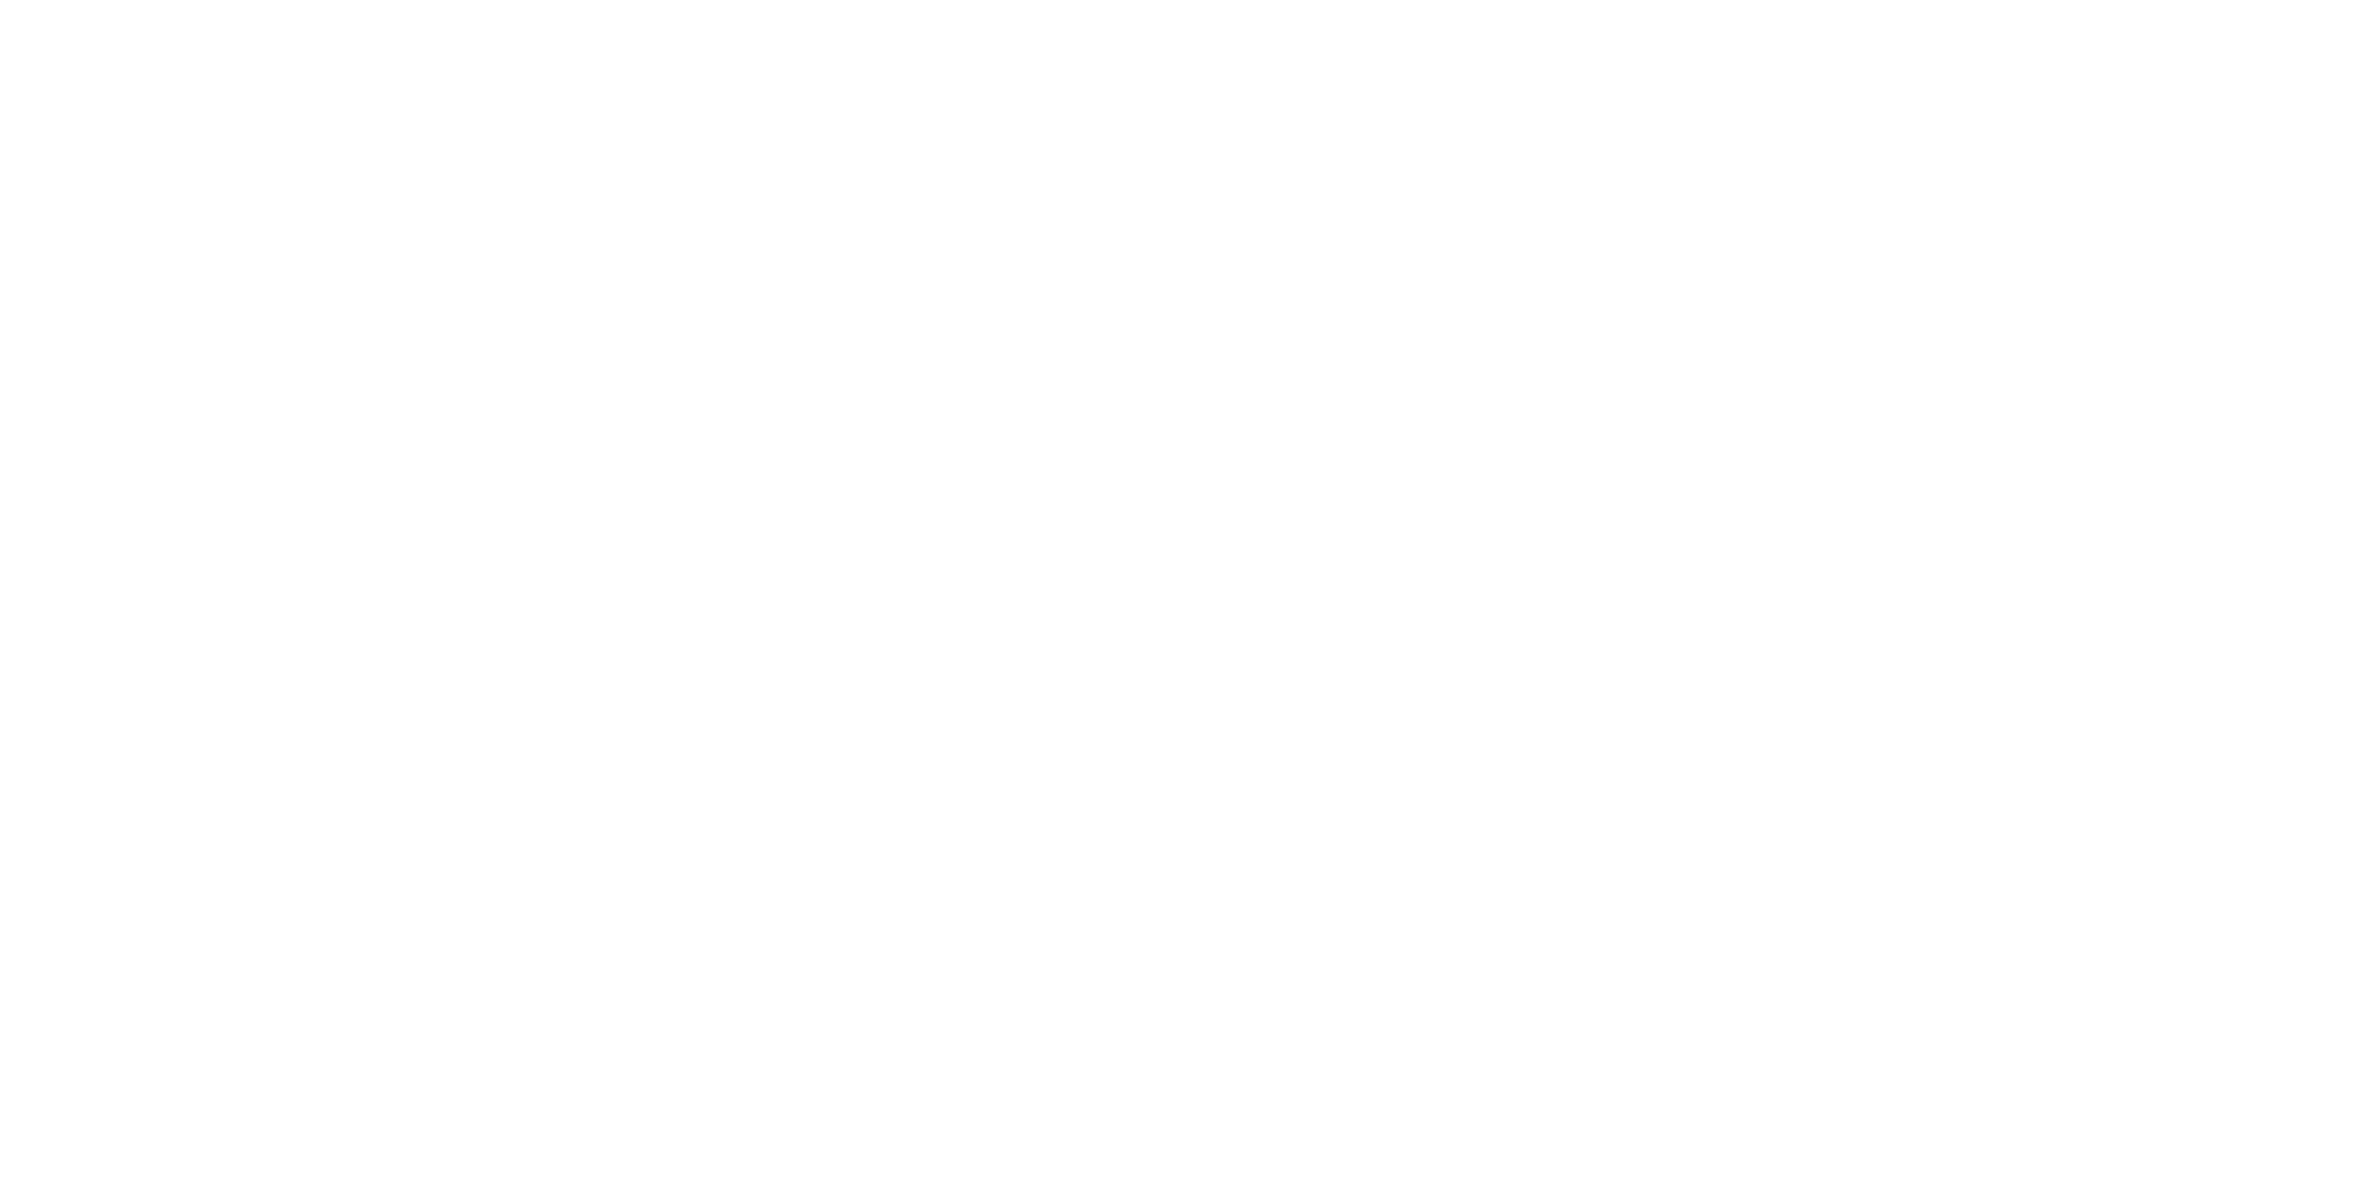 National Careers Week 2020: Dr Radha’s TOP TIPS For Dealing With Stress